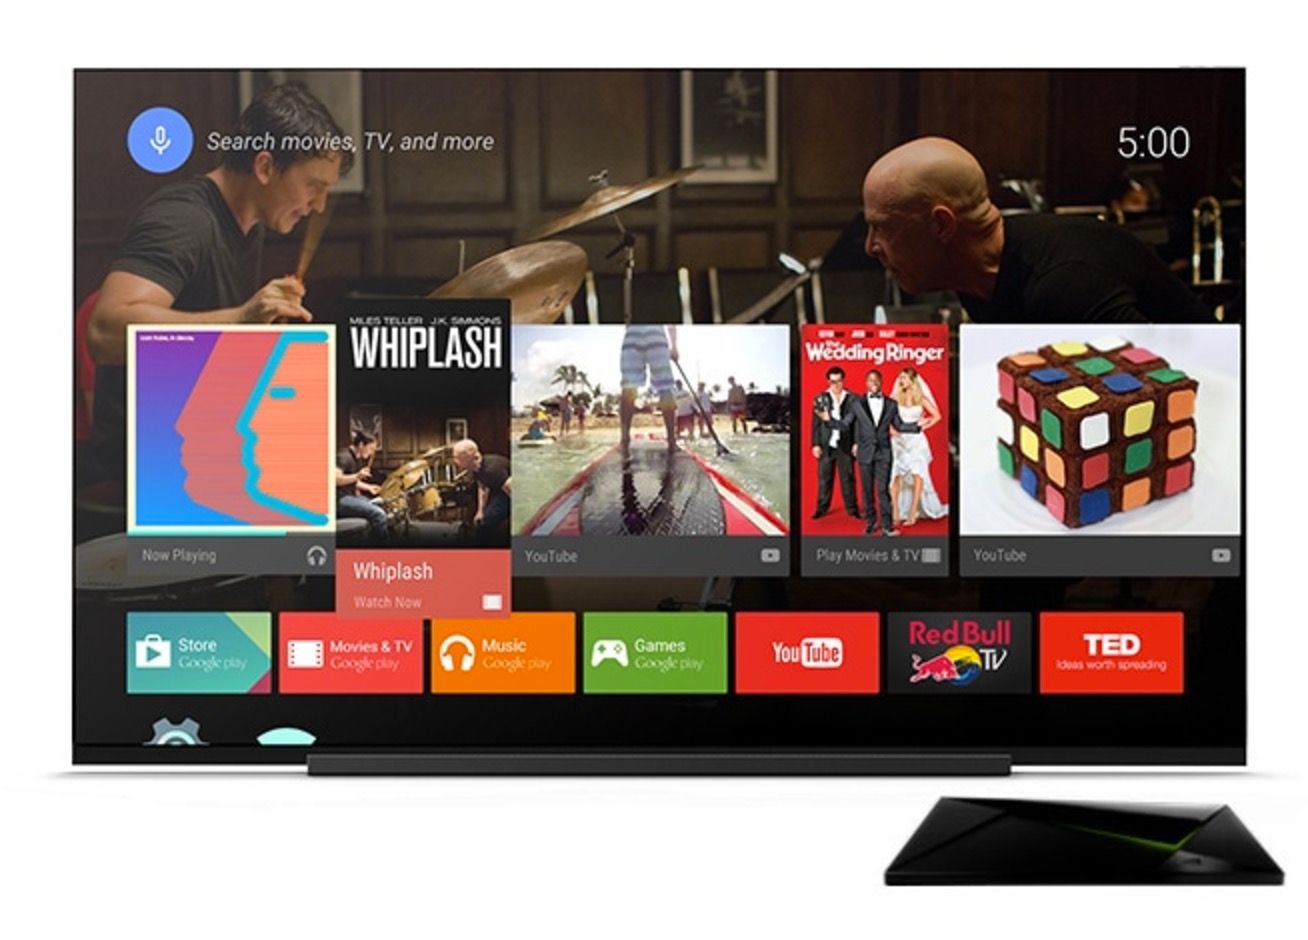 Google brings 'Quick Access' row to Android TV's homescreen